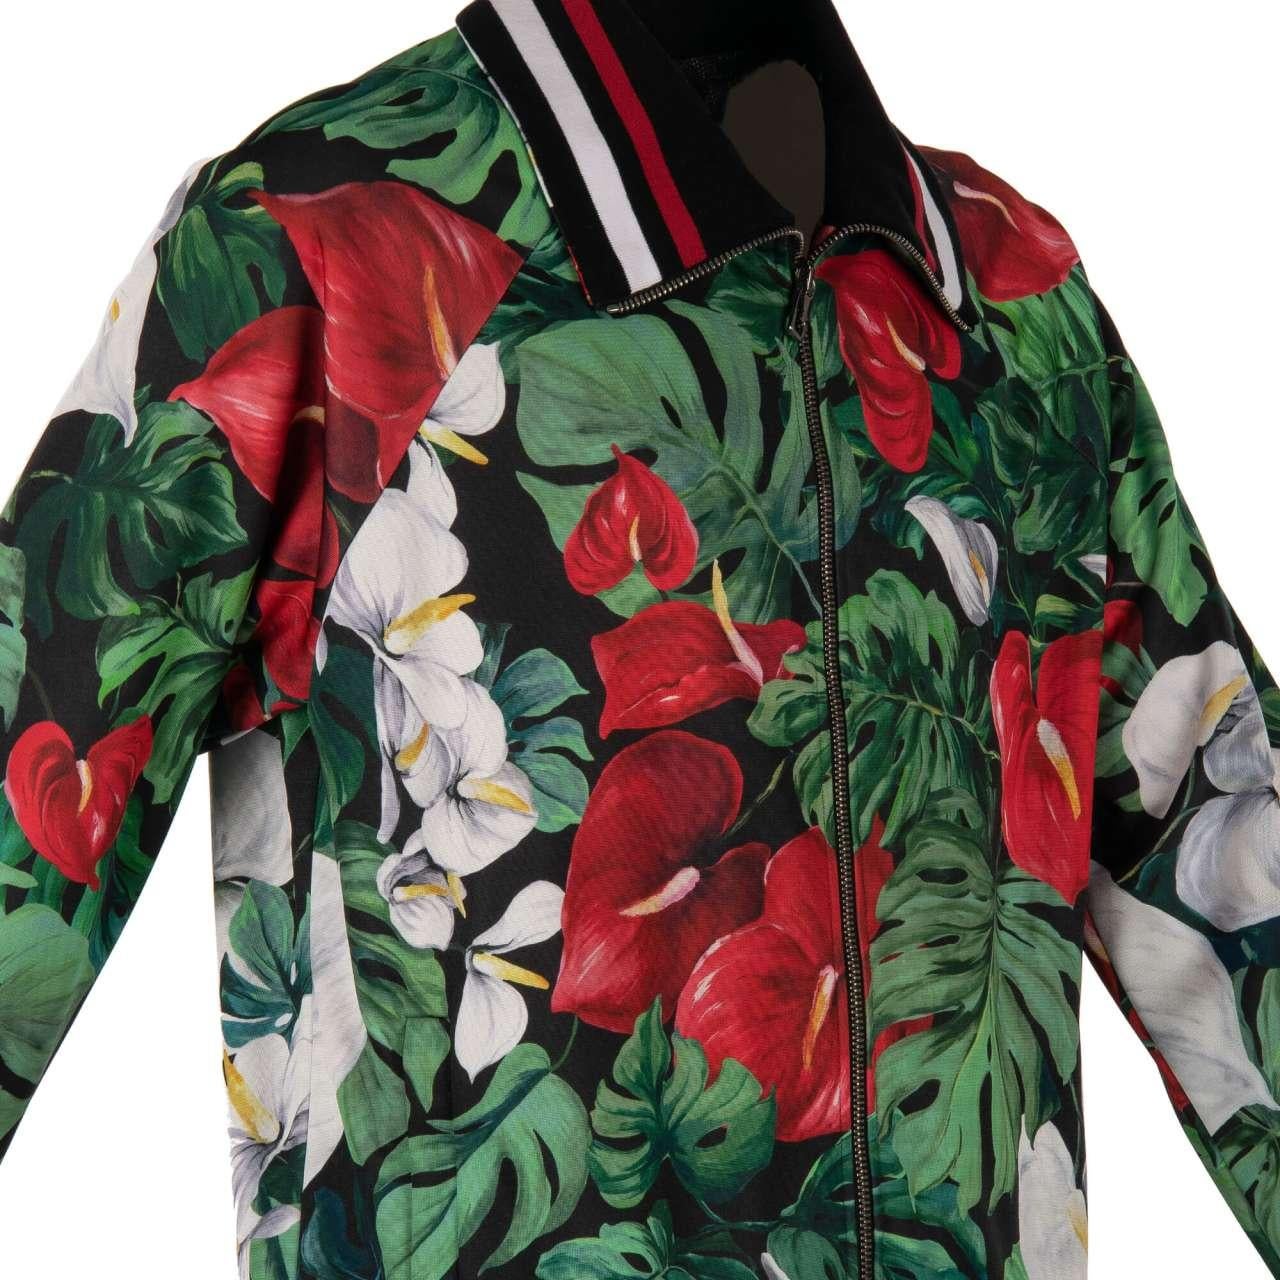 Men's Dolce & Gabbana Floral Printed Track Jacket with Knit Details and Pockets 50 M-L